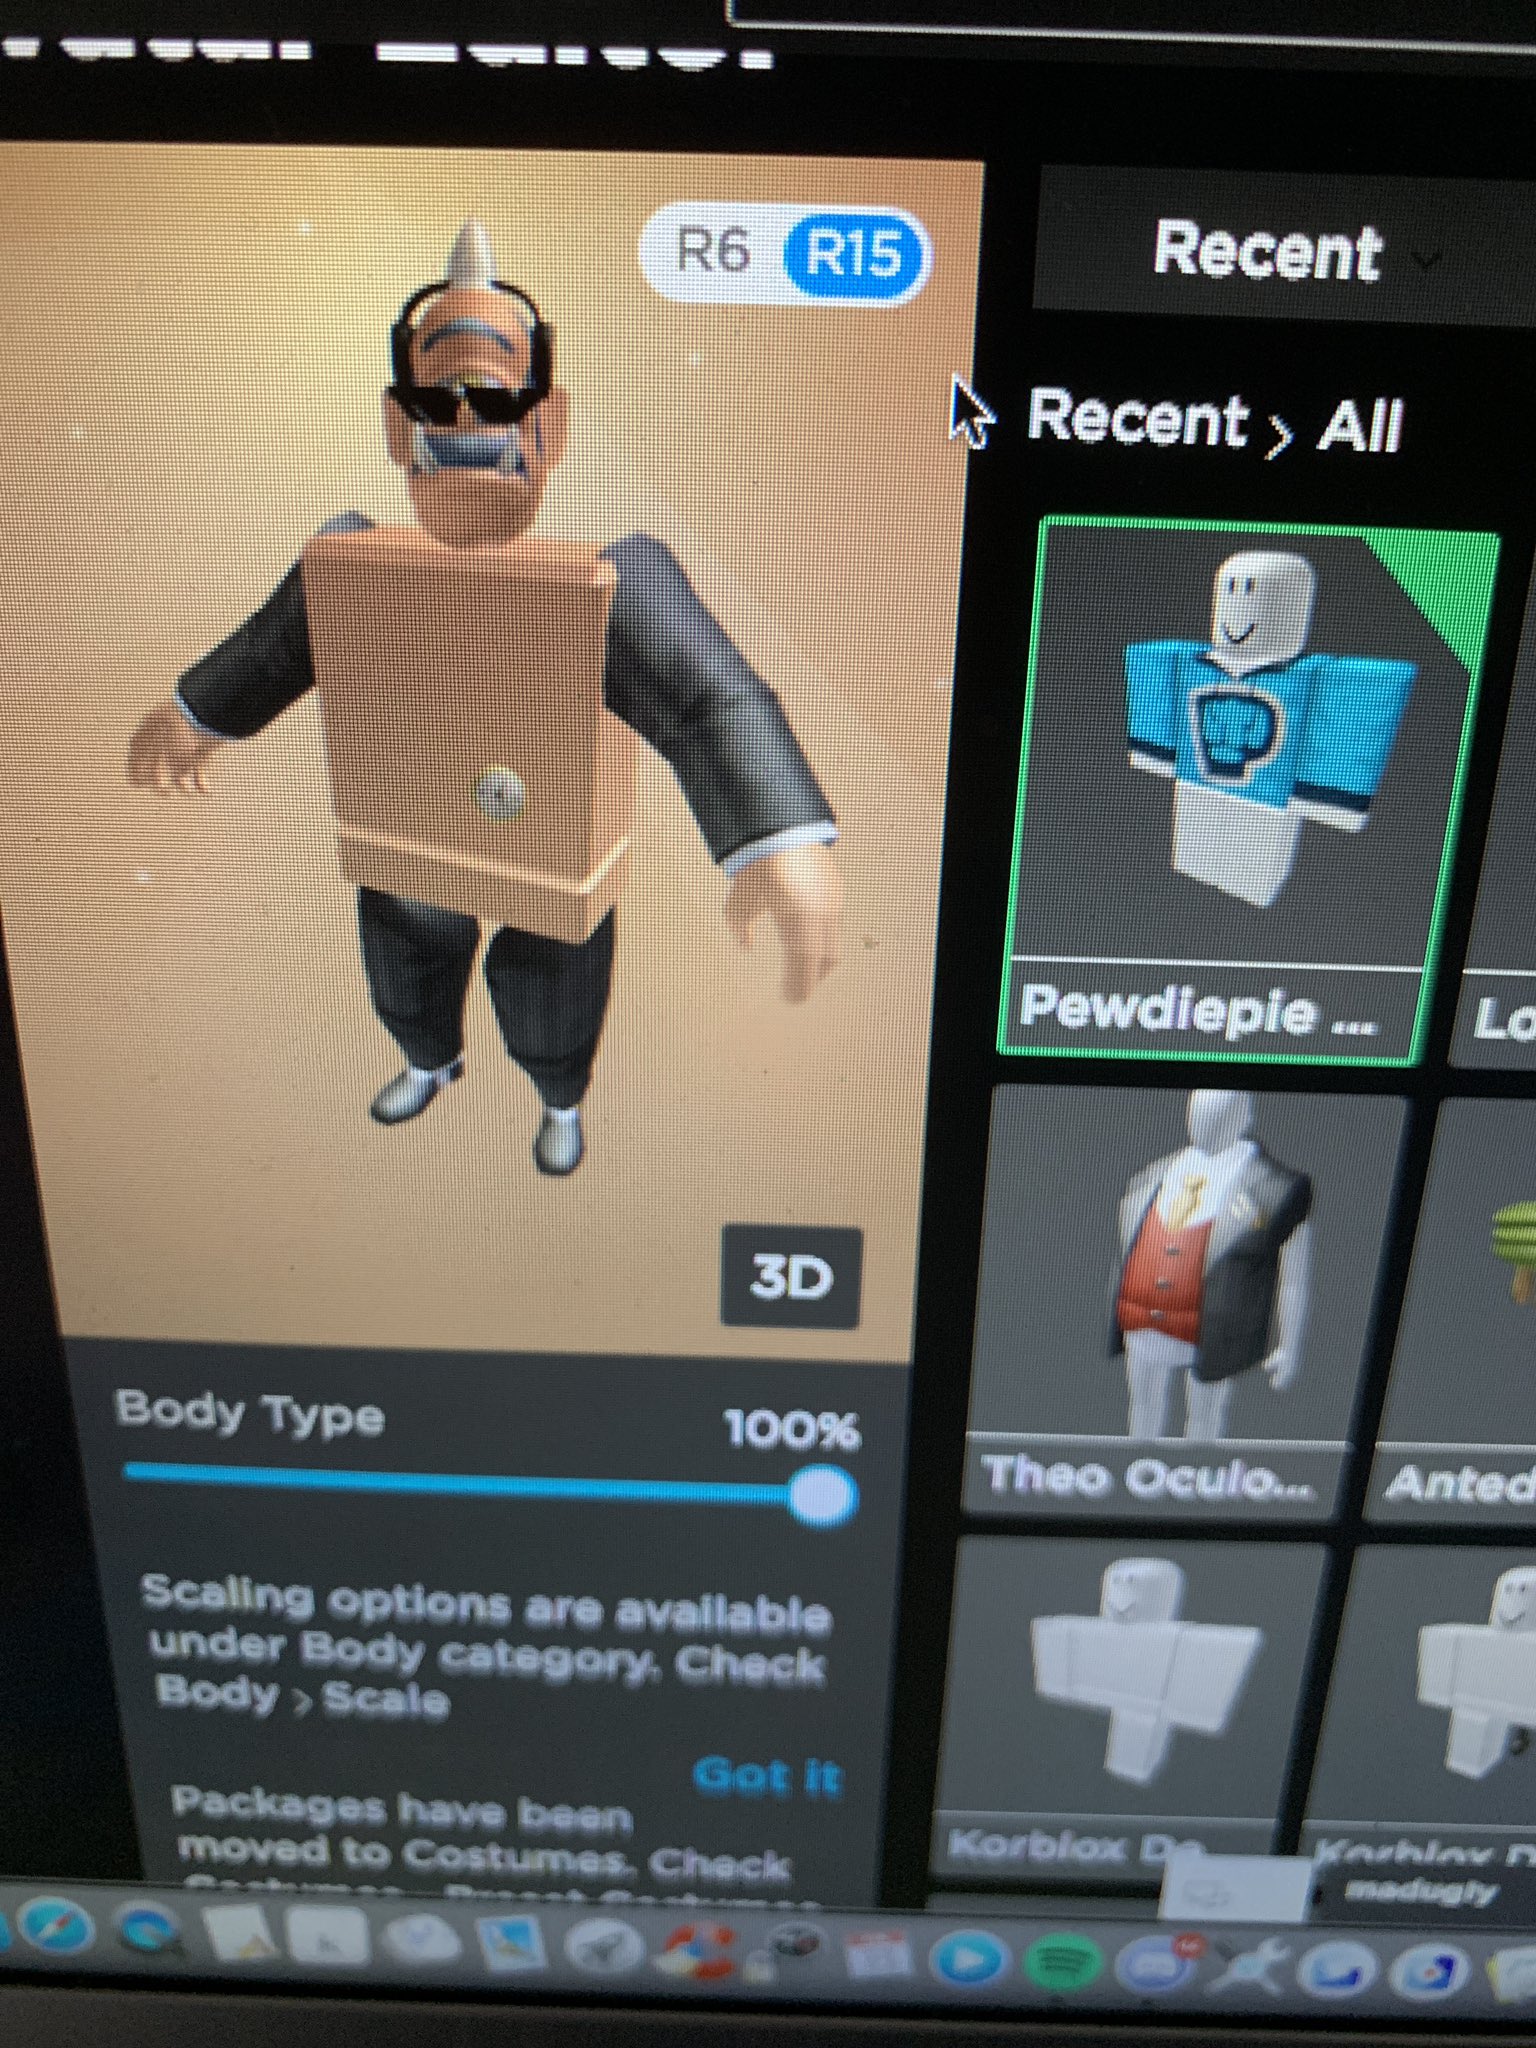 Alex On Twitter So I Just Bought And Wore That Commonly Copied Blue Pewdiepie Shirt On Roblox And It Doesn T Show Up On My Character It S Funny Because If They Can Do This For Every One Of Those Copied Blue Pewdiepie Shirts Pants Why Don T They Do - pewdiepie t shirt roblox free